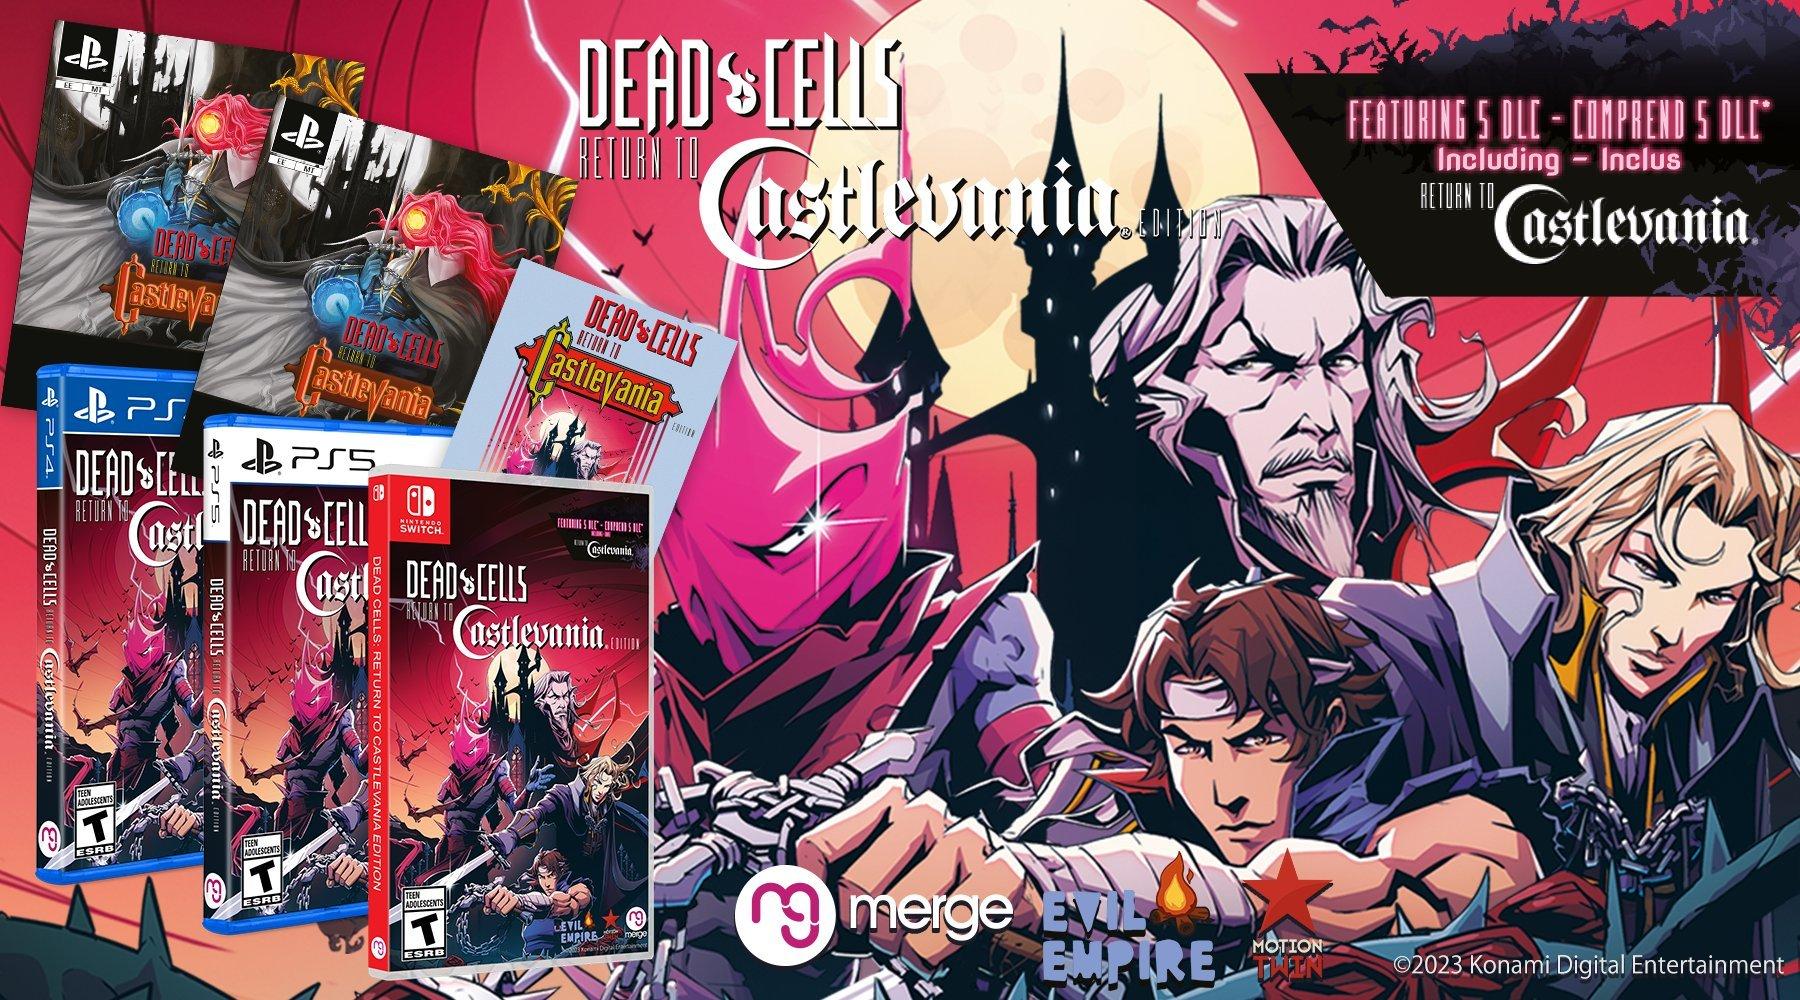 Dead Cells teams up with Castlevania in upcoming DLC